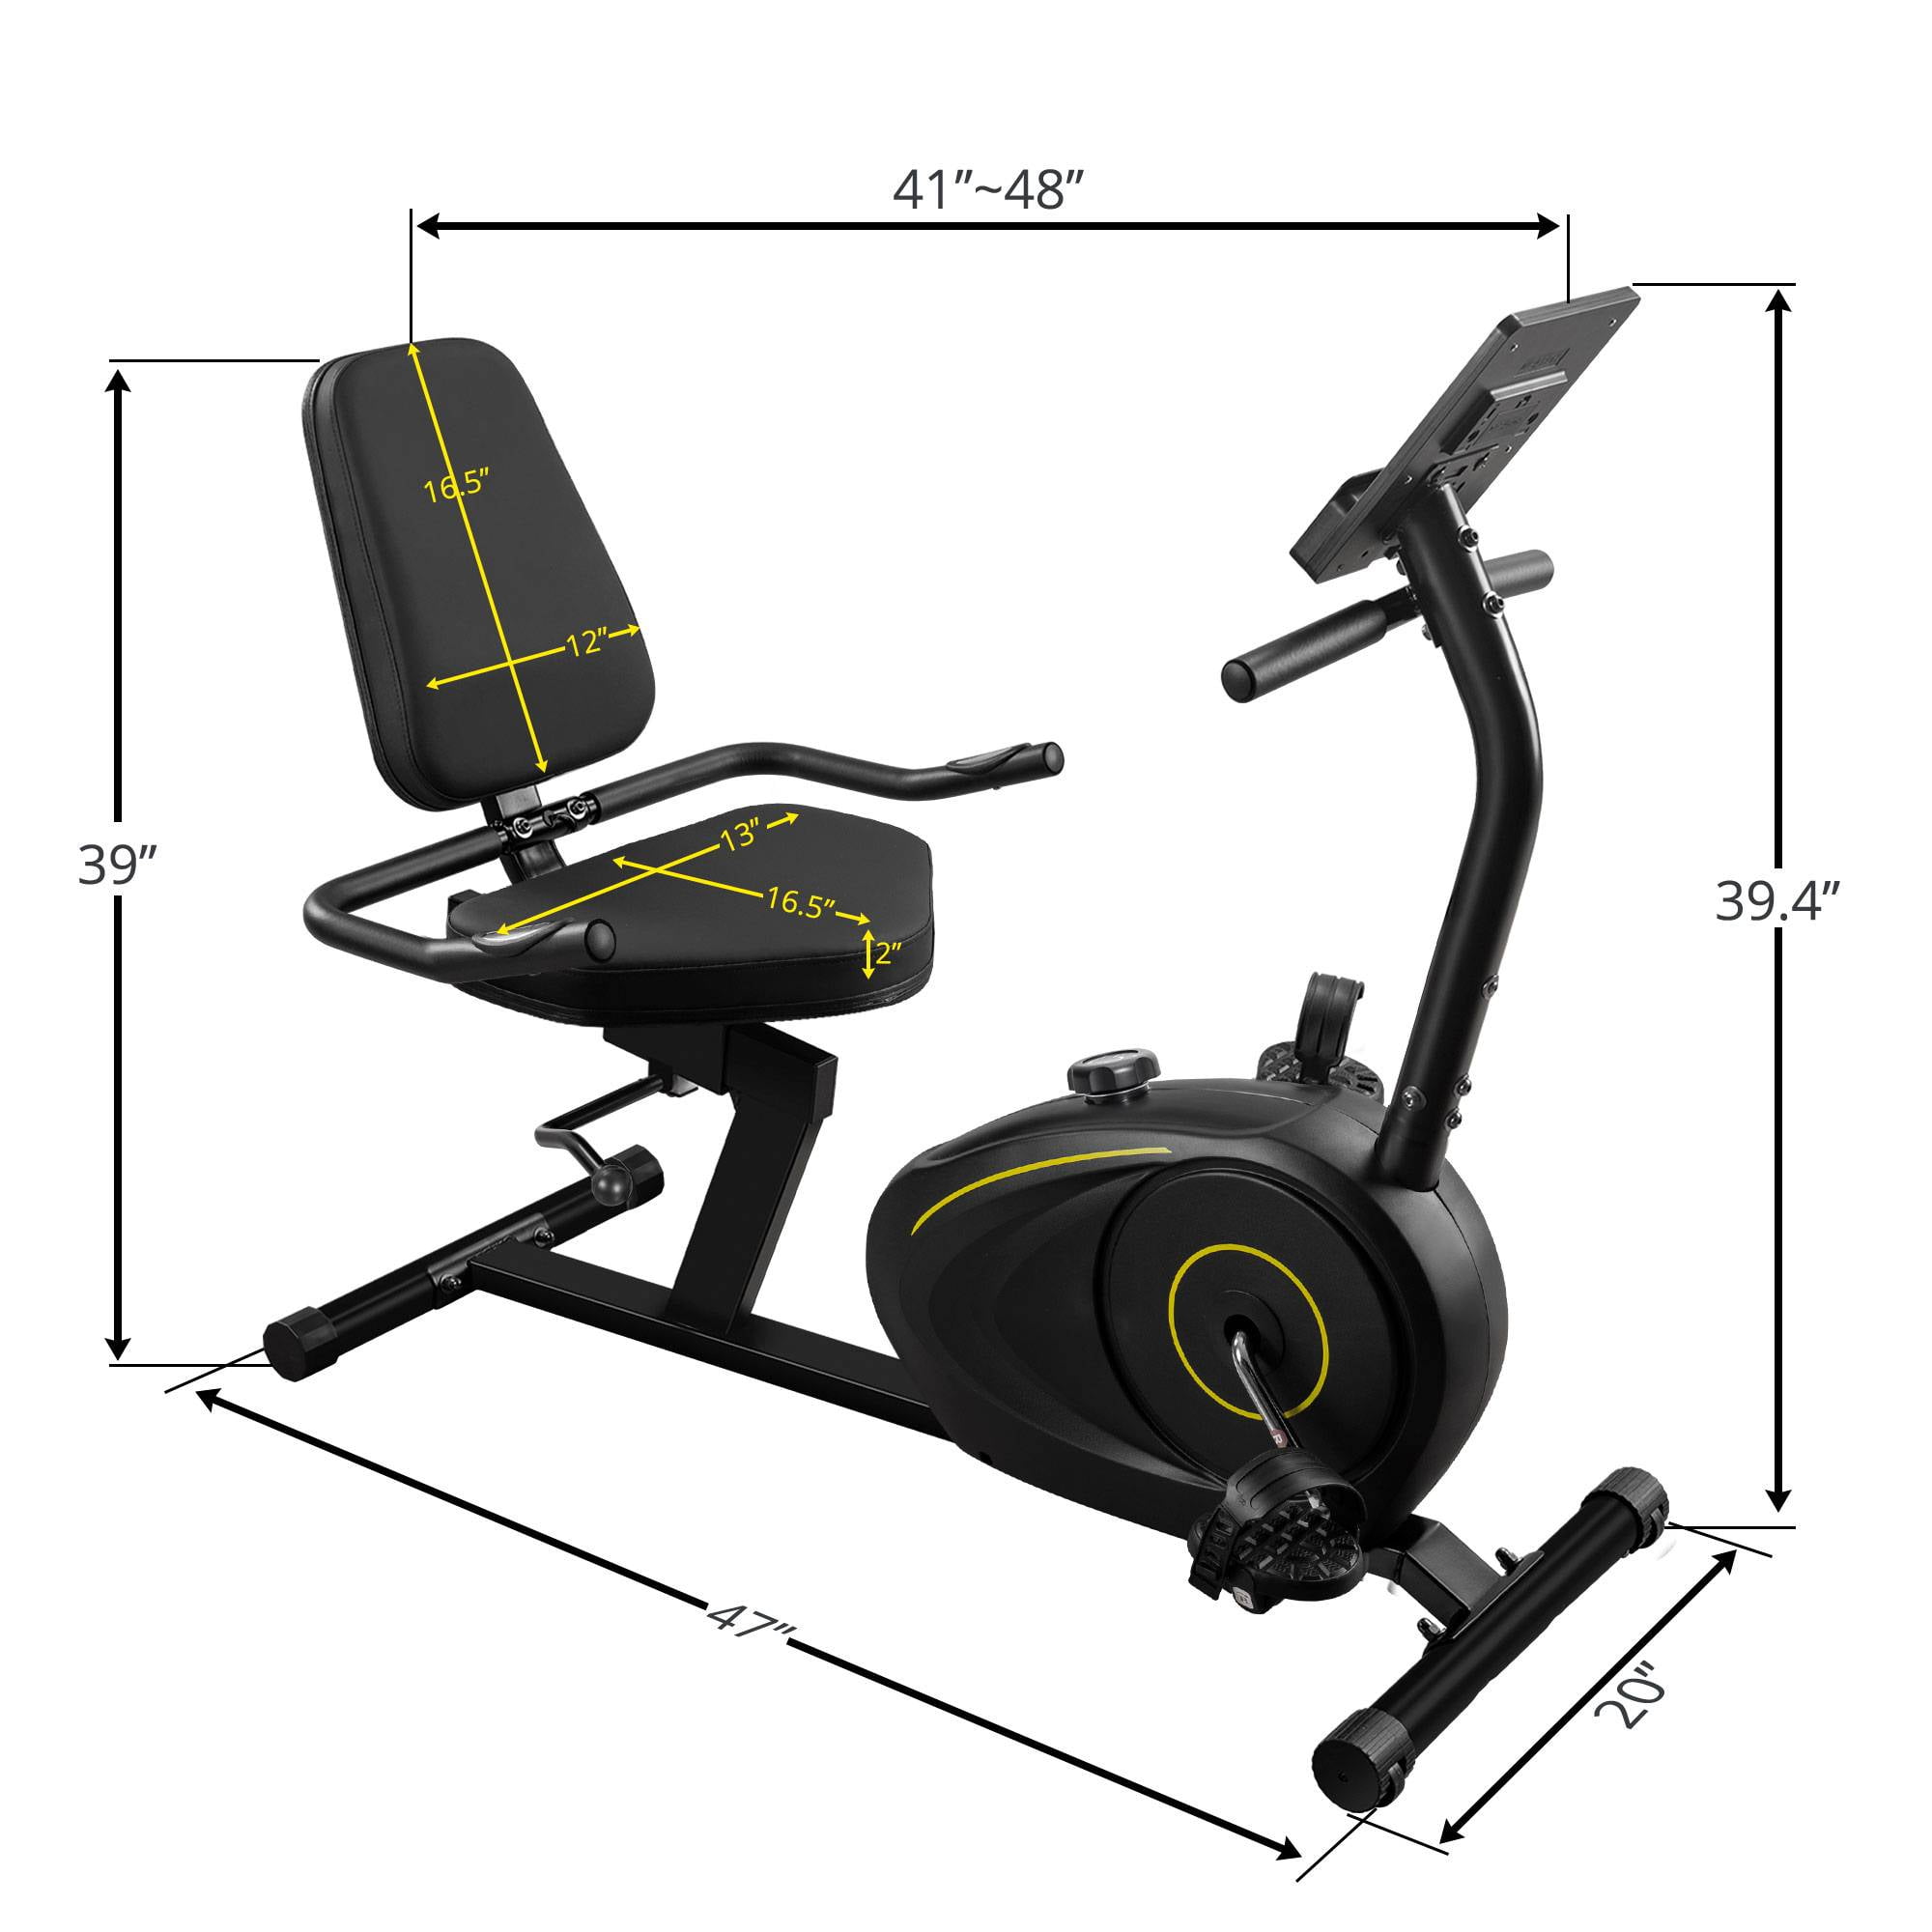 380lb Weight Capacity Details about   Recumbent Exercise Bike Easy Adjustable Seat 